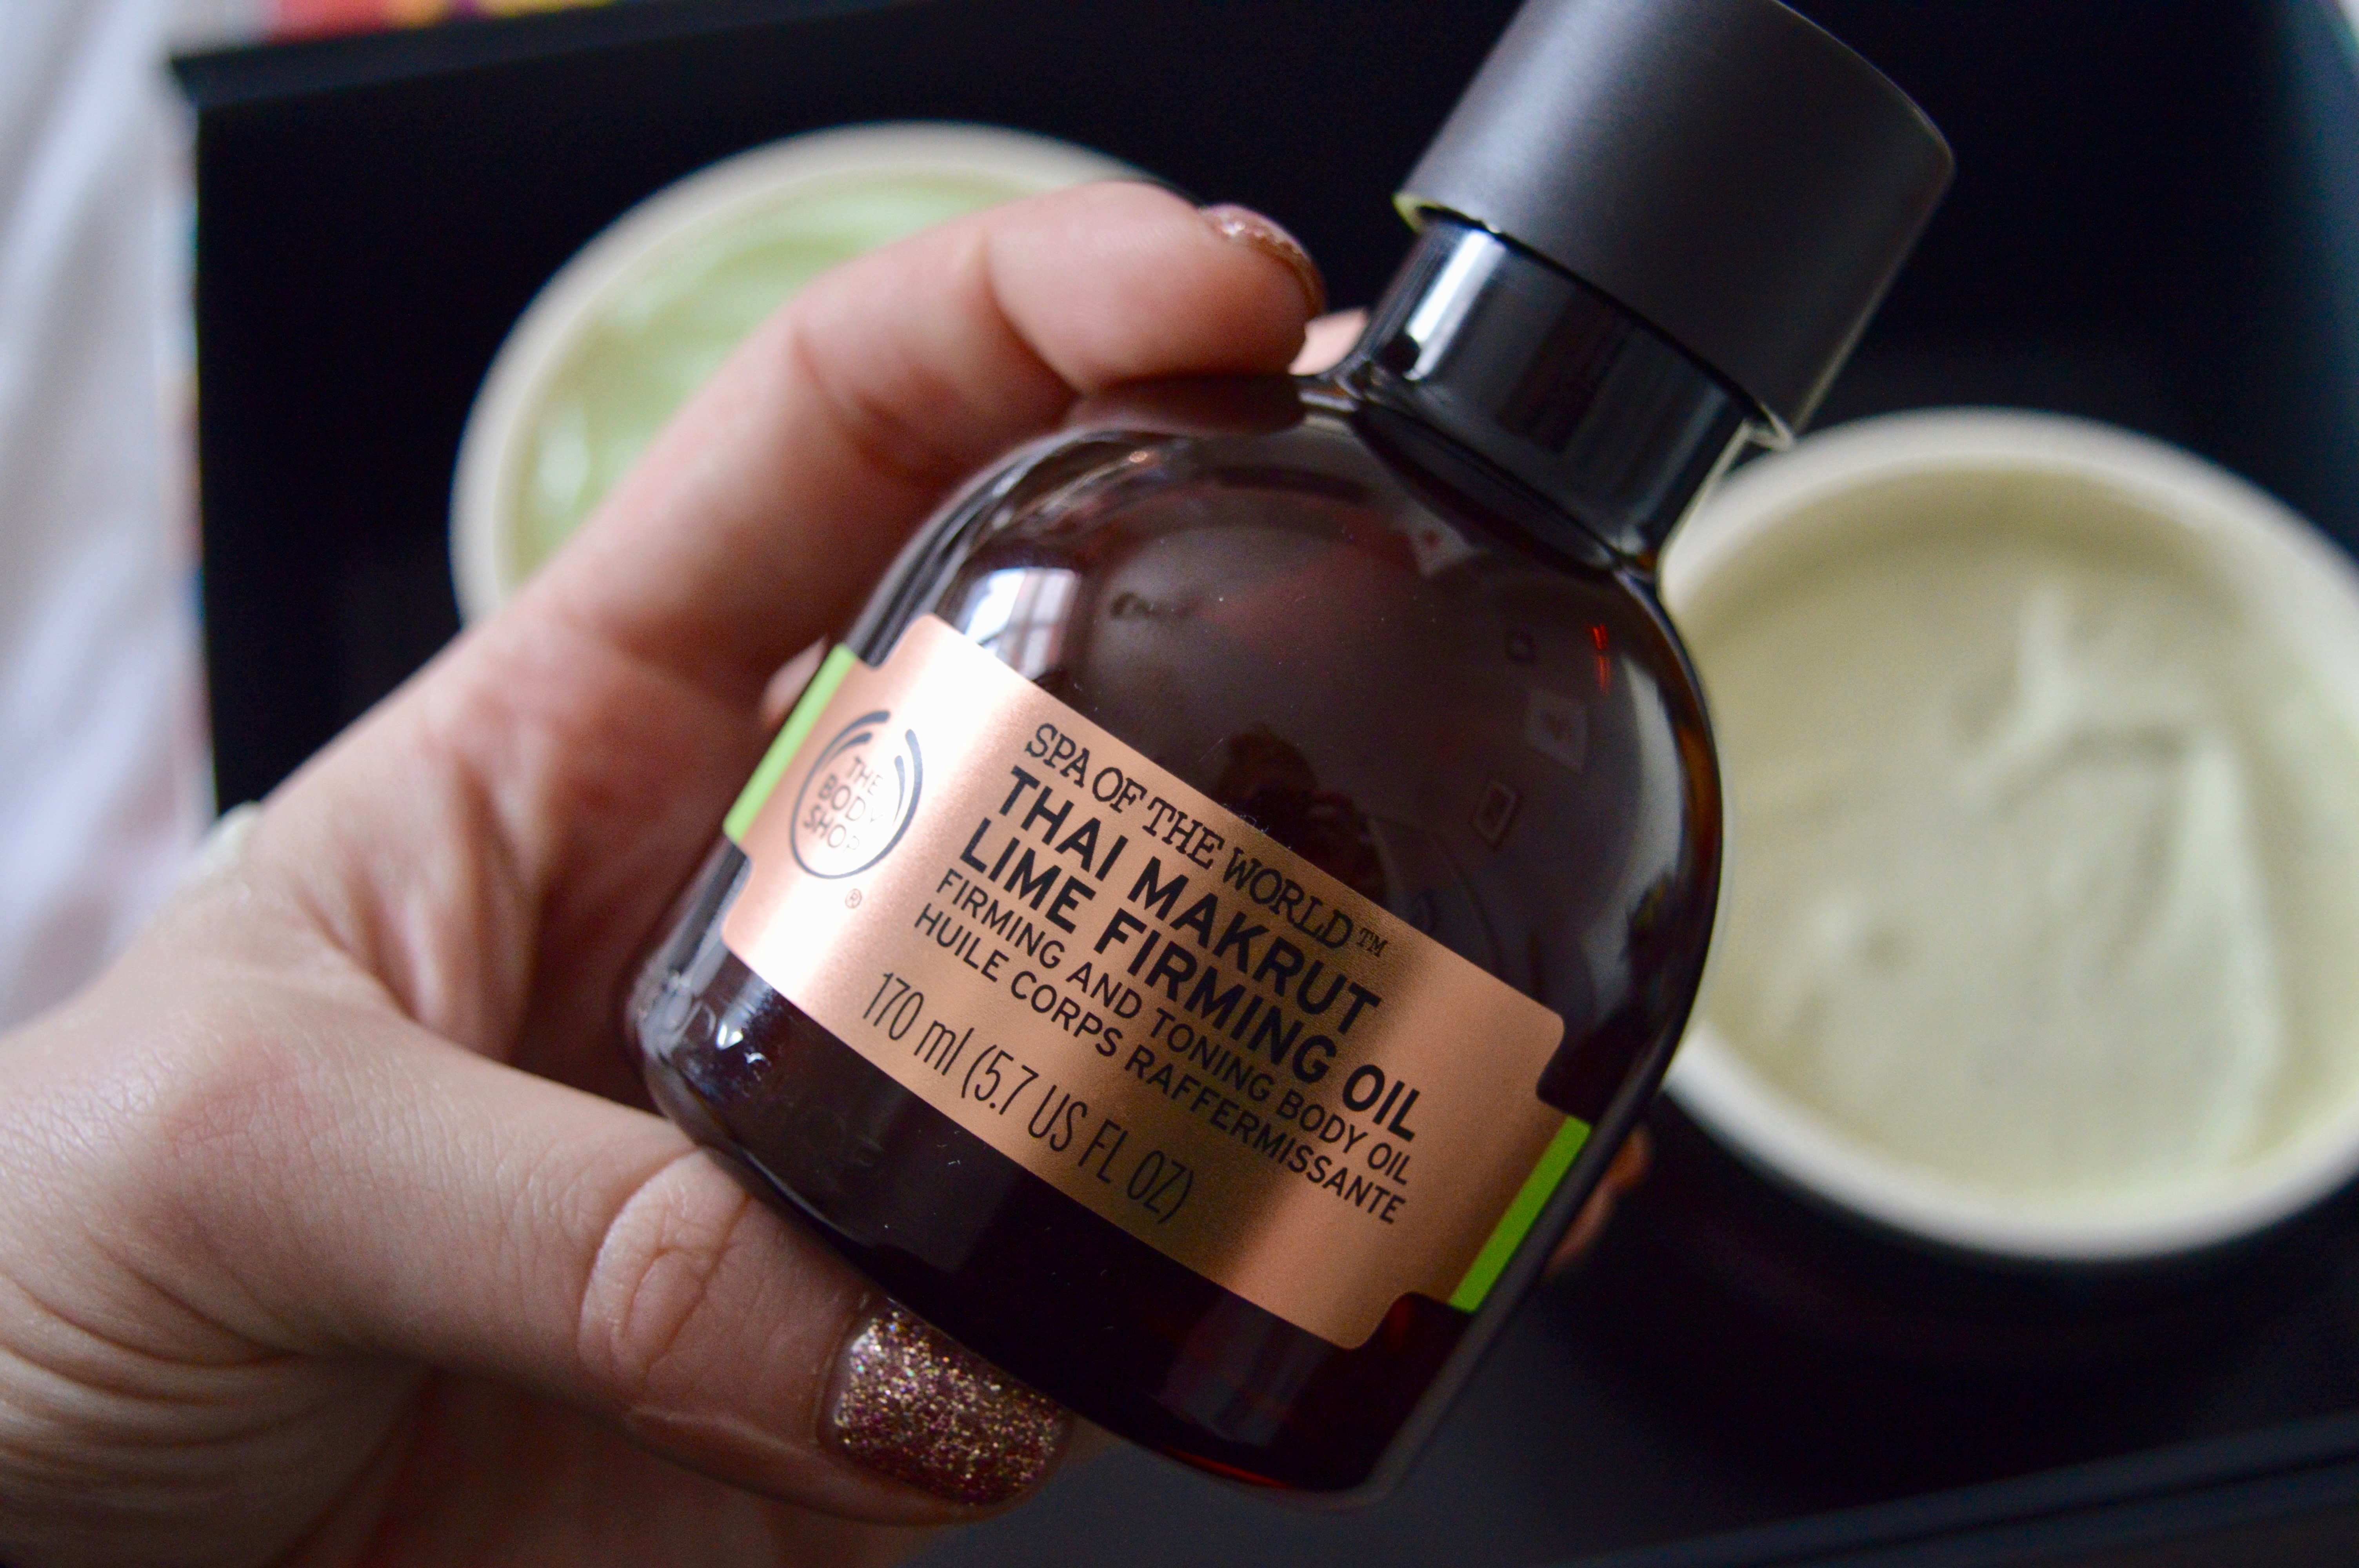 The Body Shop Spa of the World Firming and Toning Range Elle Blonde